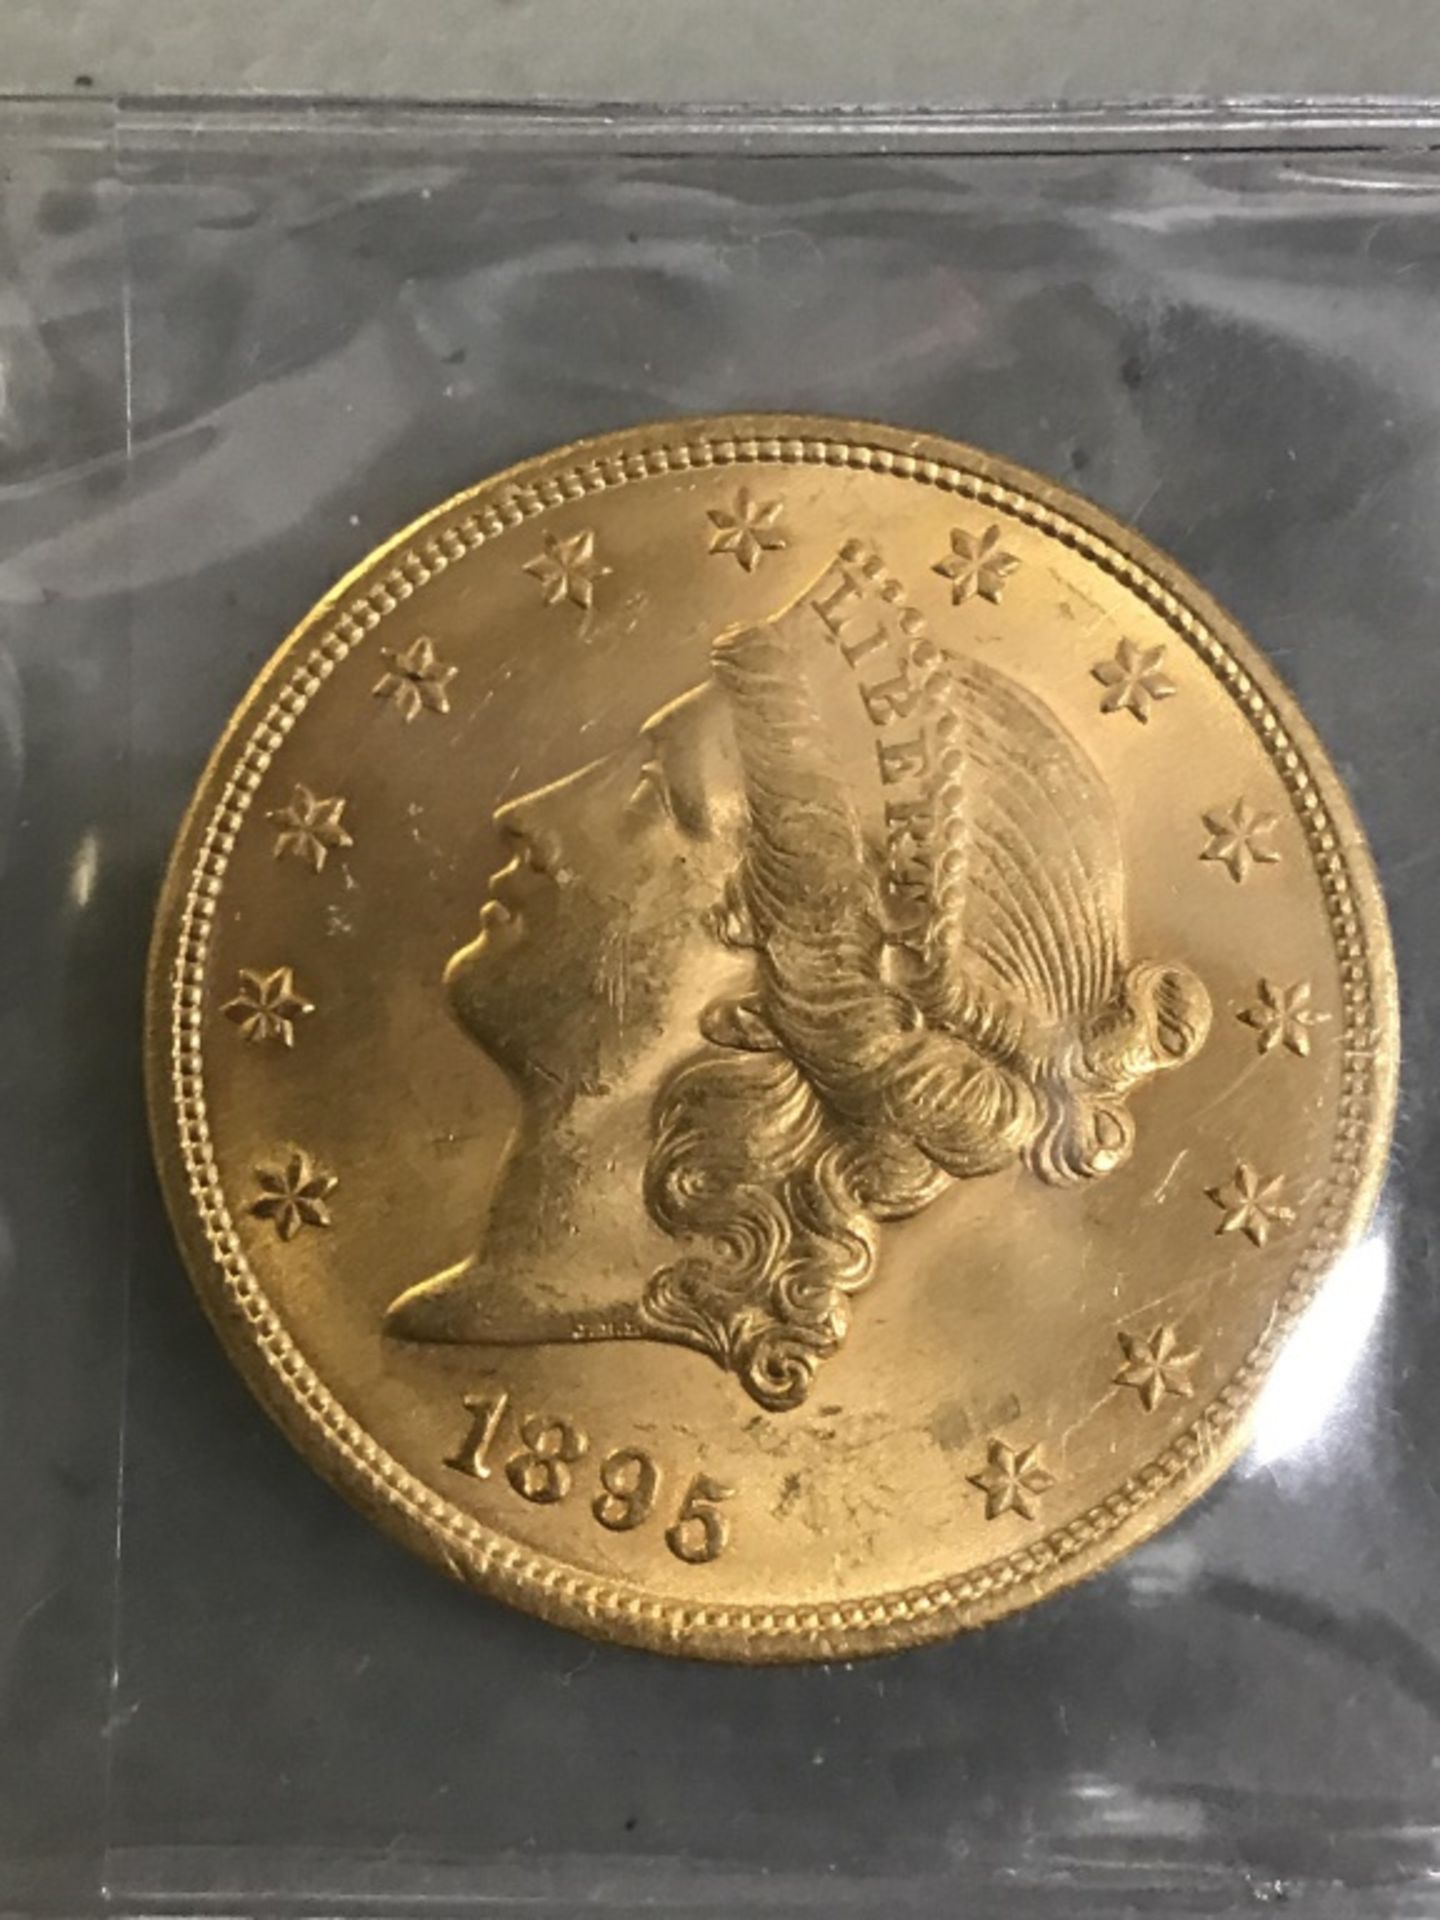 $20 US Gold 1895 Coin - Image 2 of 9